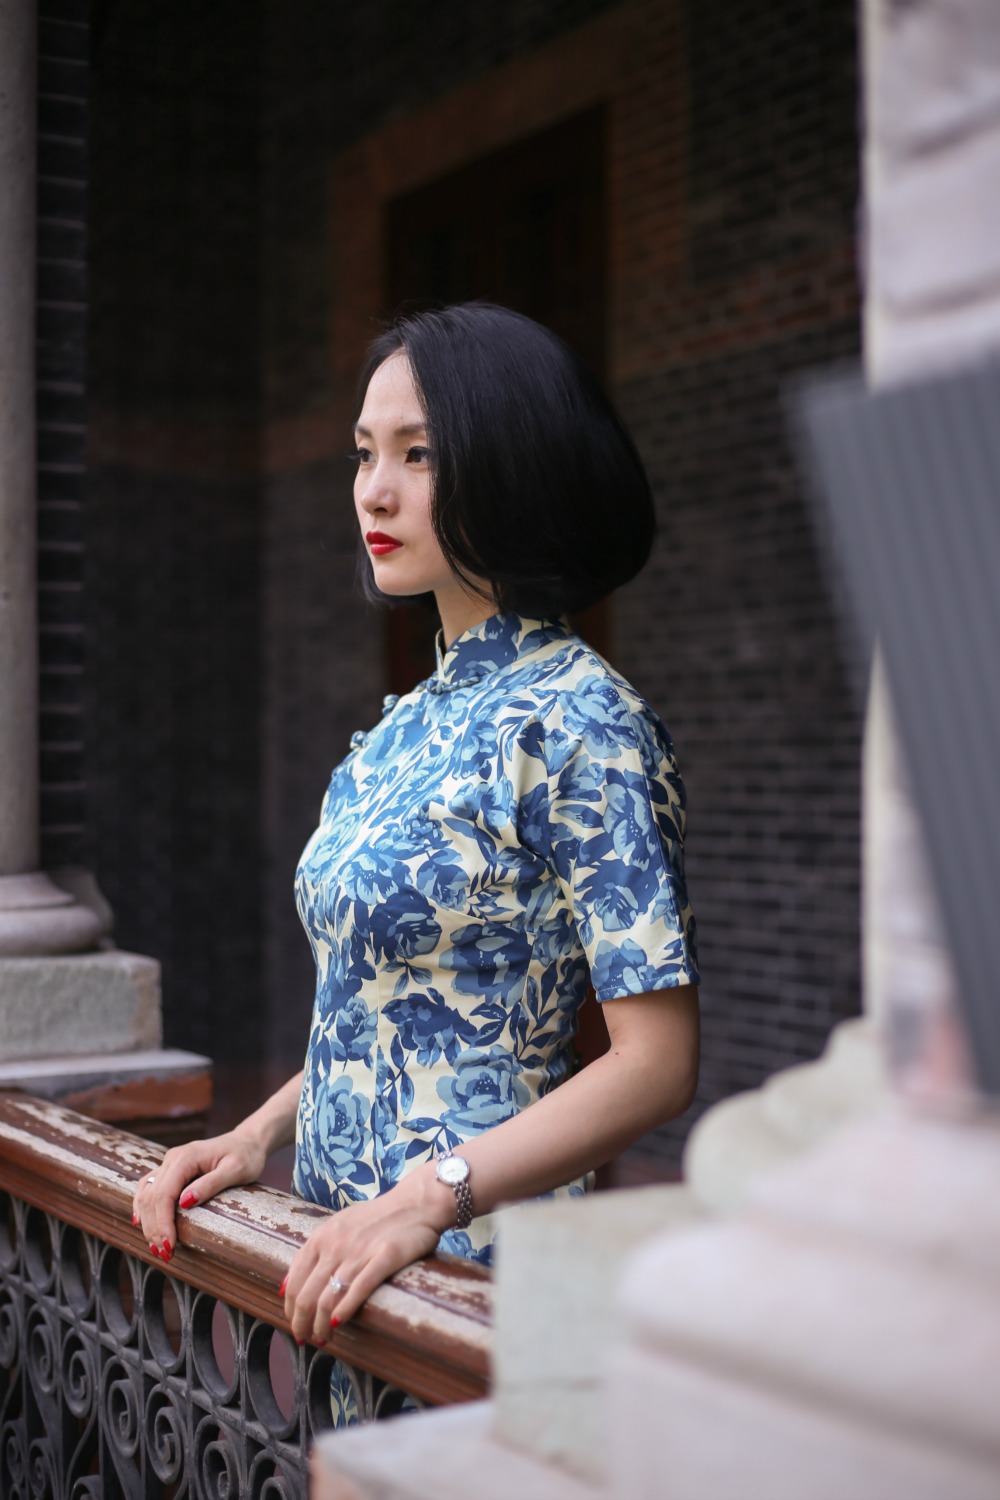 Wearing Blue and white qipao at Sinan Mansions Shanghai side view